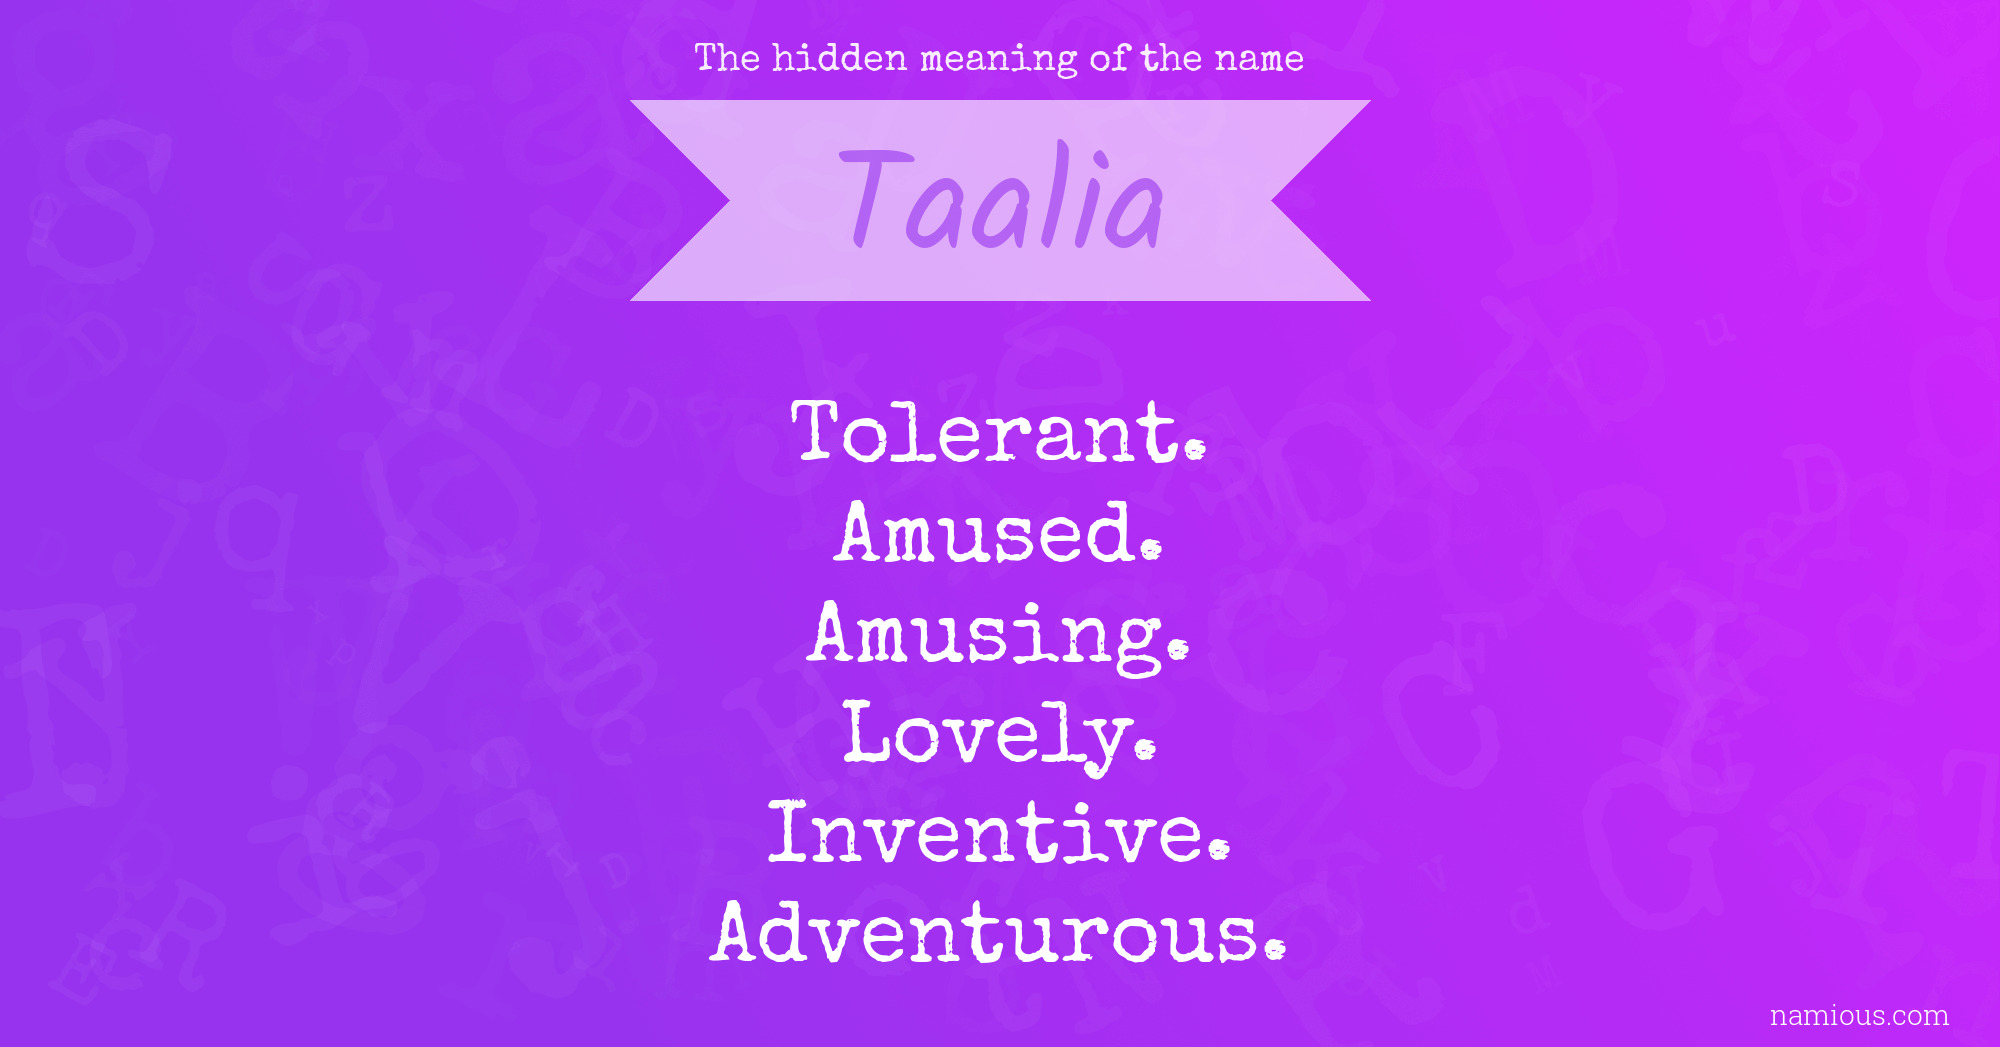 The hidden meaning of the name Taalia